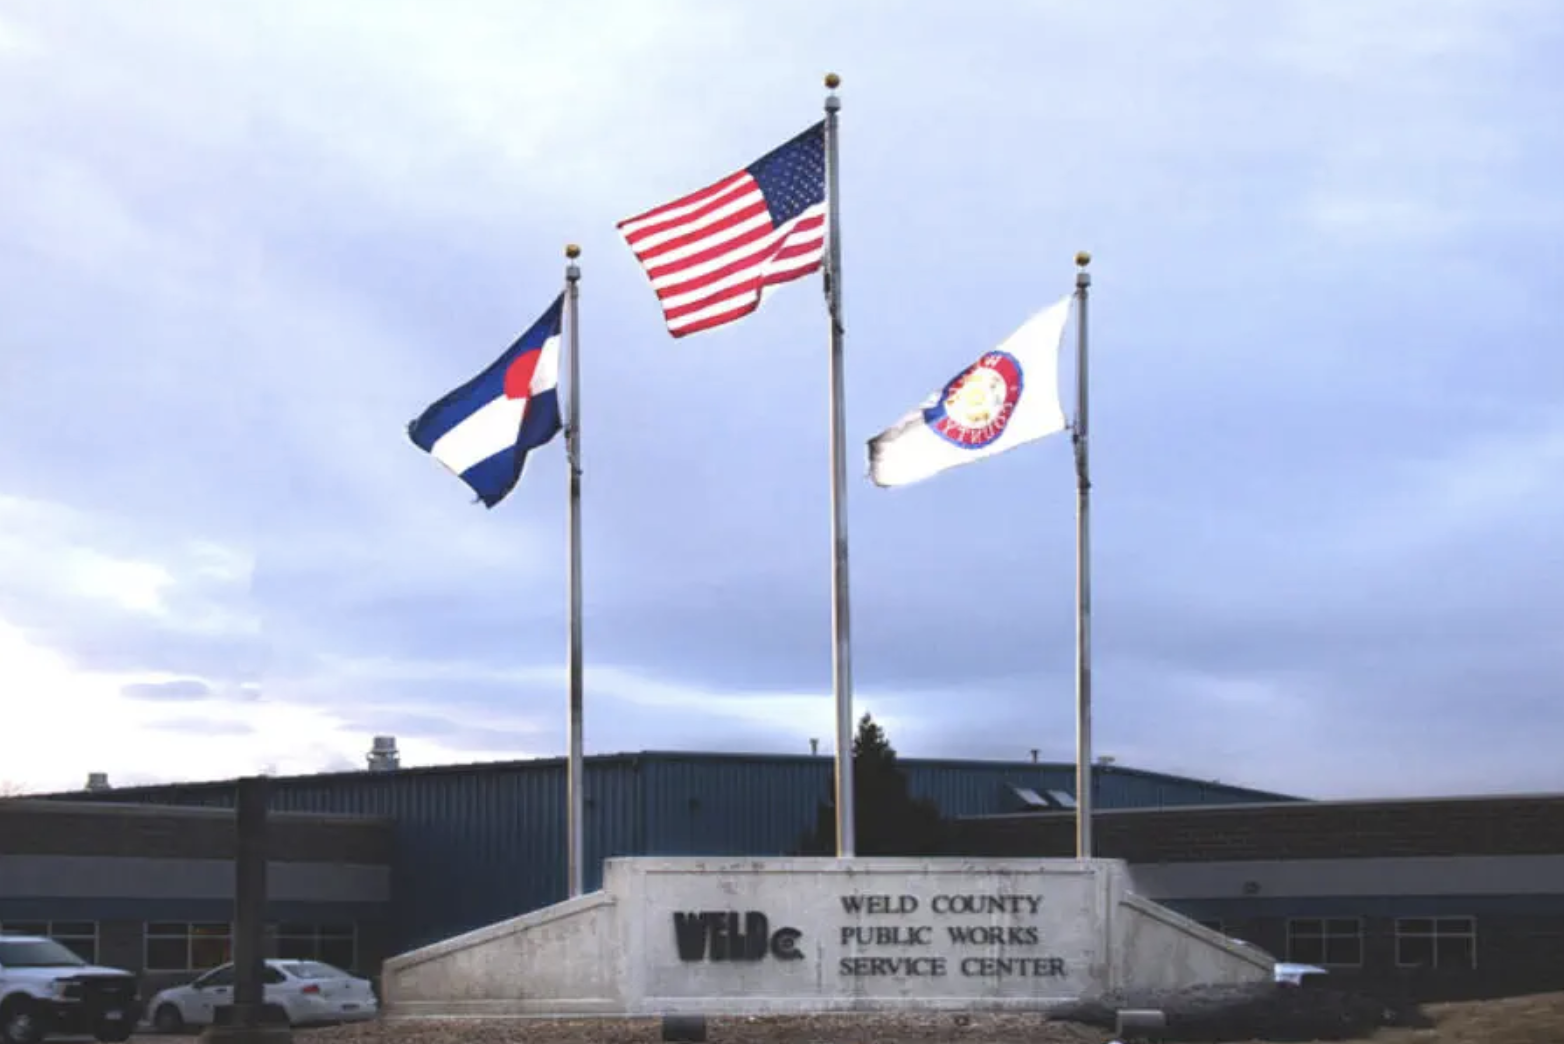 Weld County Public Works Service Center